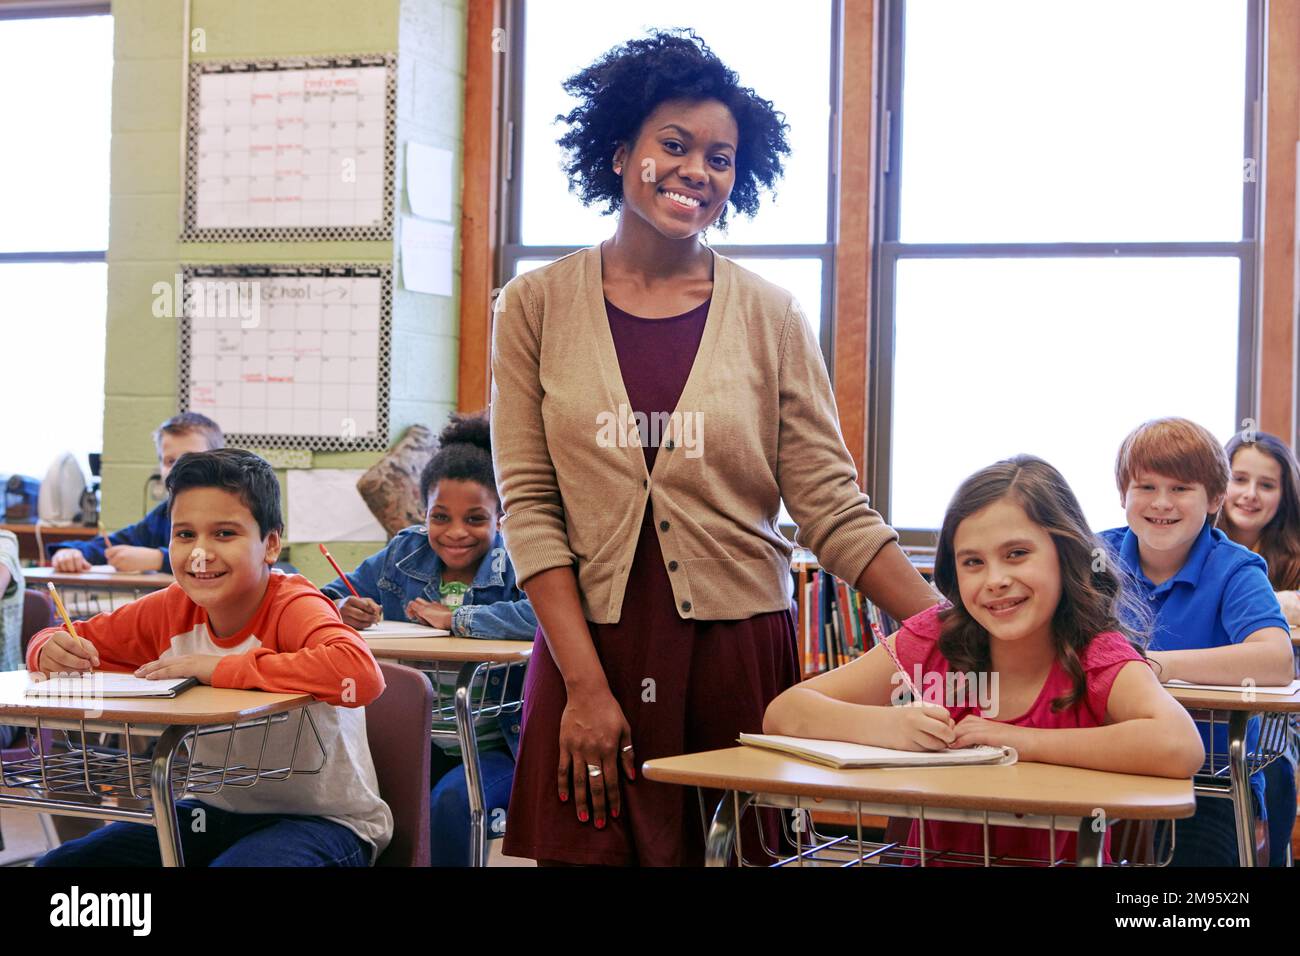 Education, learning and teacher in classroom with kids writing exam or test at Montessori school. Portrait of black woman, happy children at desk and Stock Photo